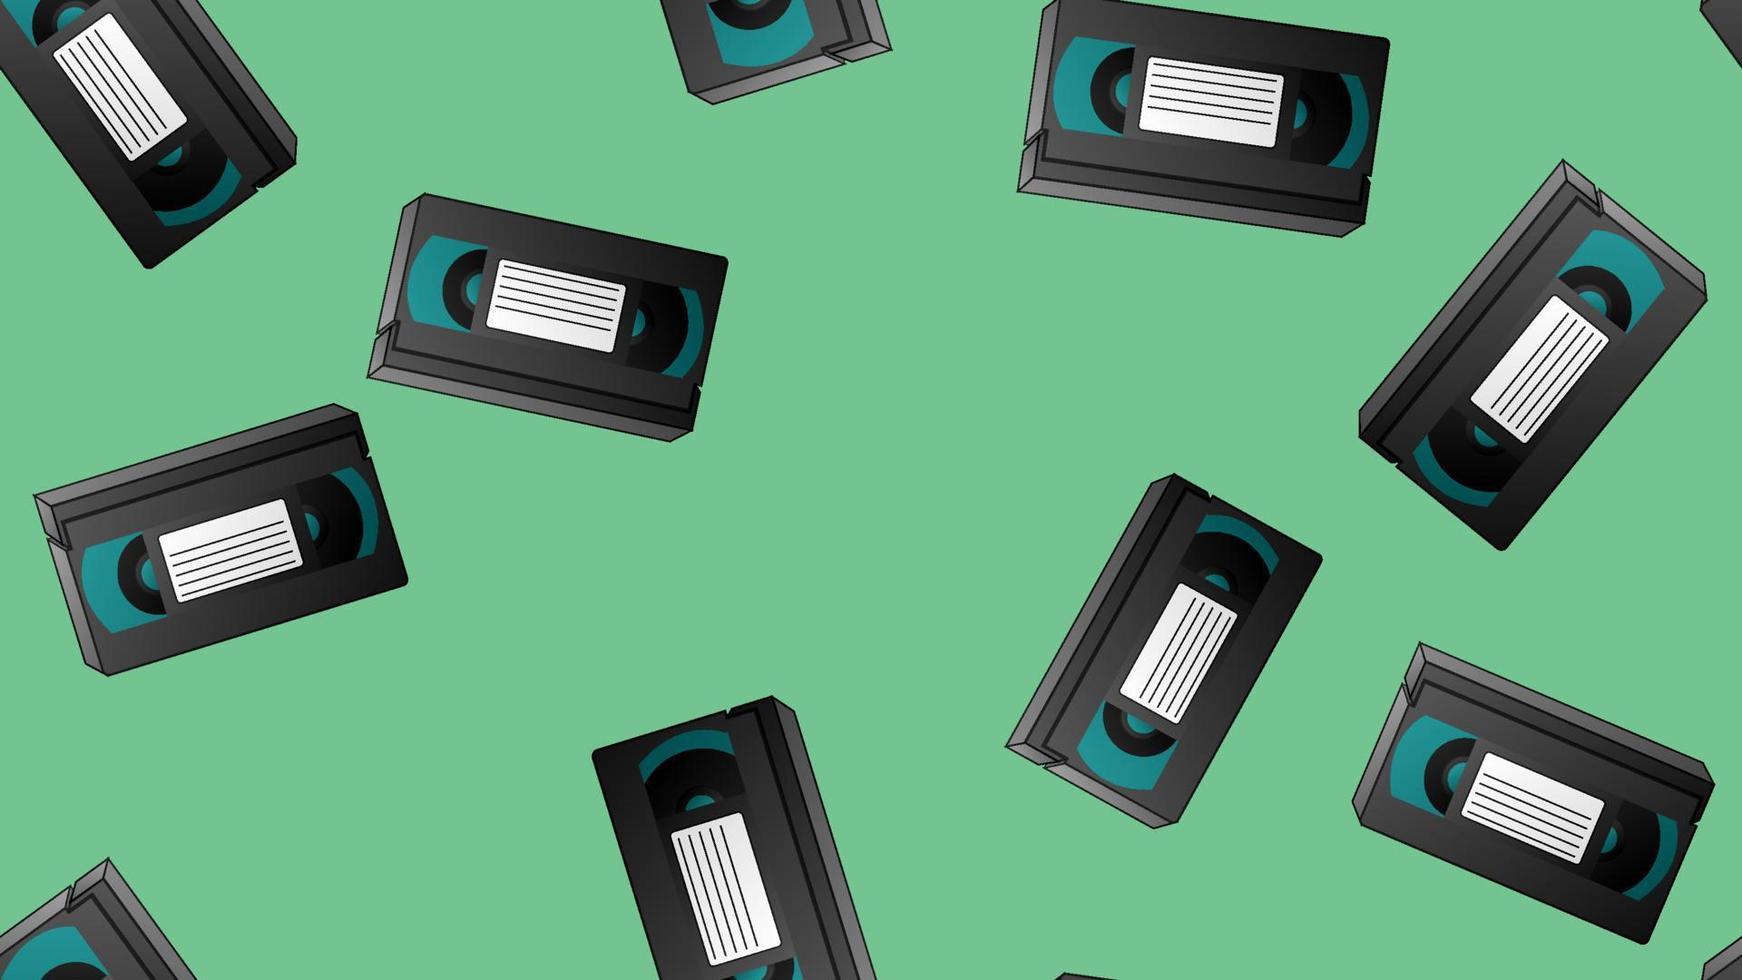 Seamless pattern of retro old hipster video cassettes for watching movies from the 70s, 80s, 90s, 2000s on a green background vector